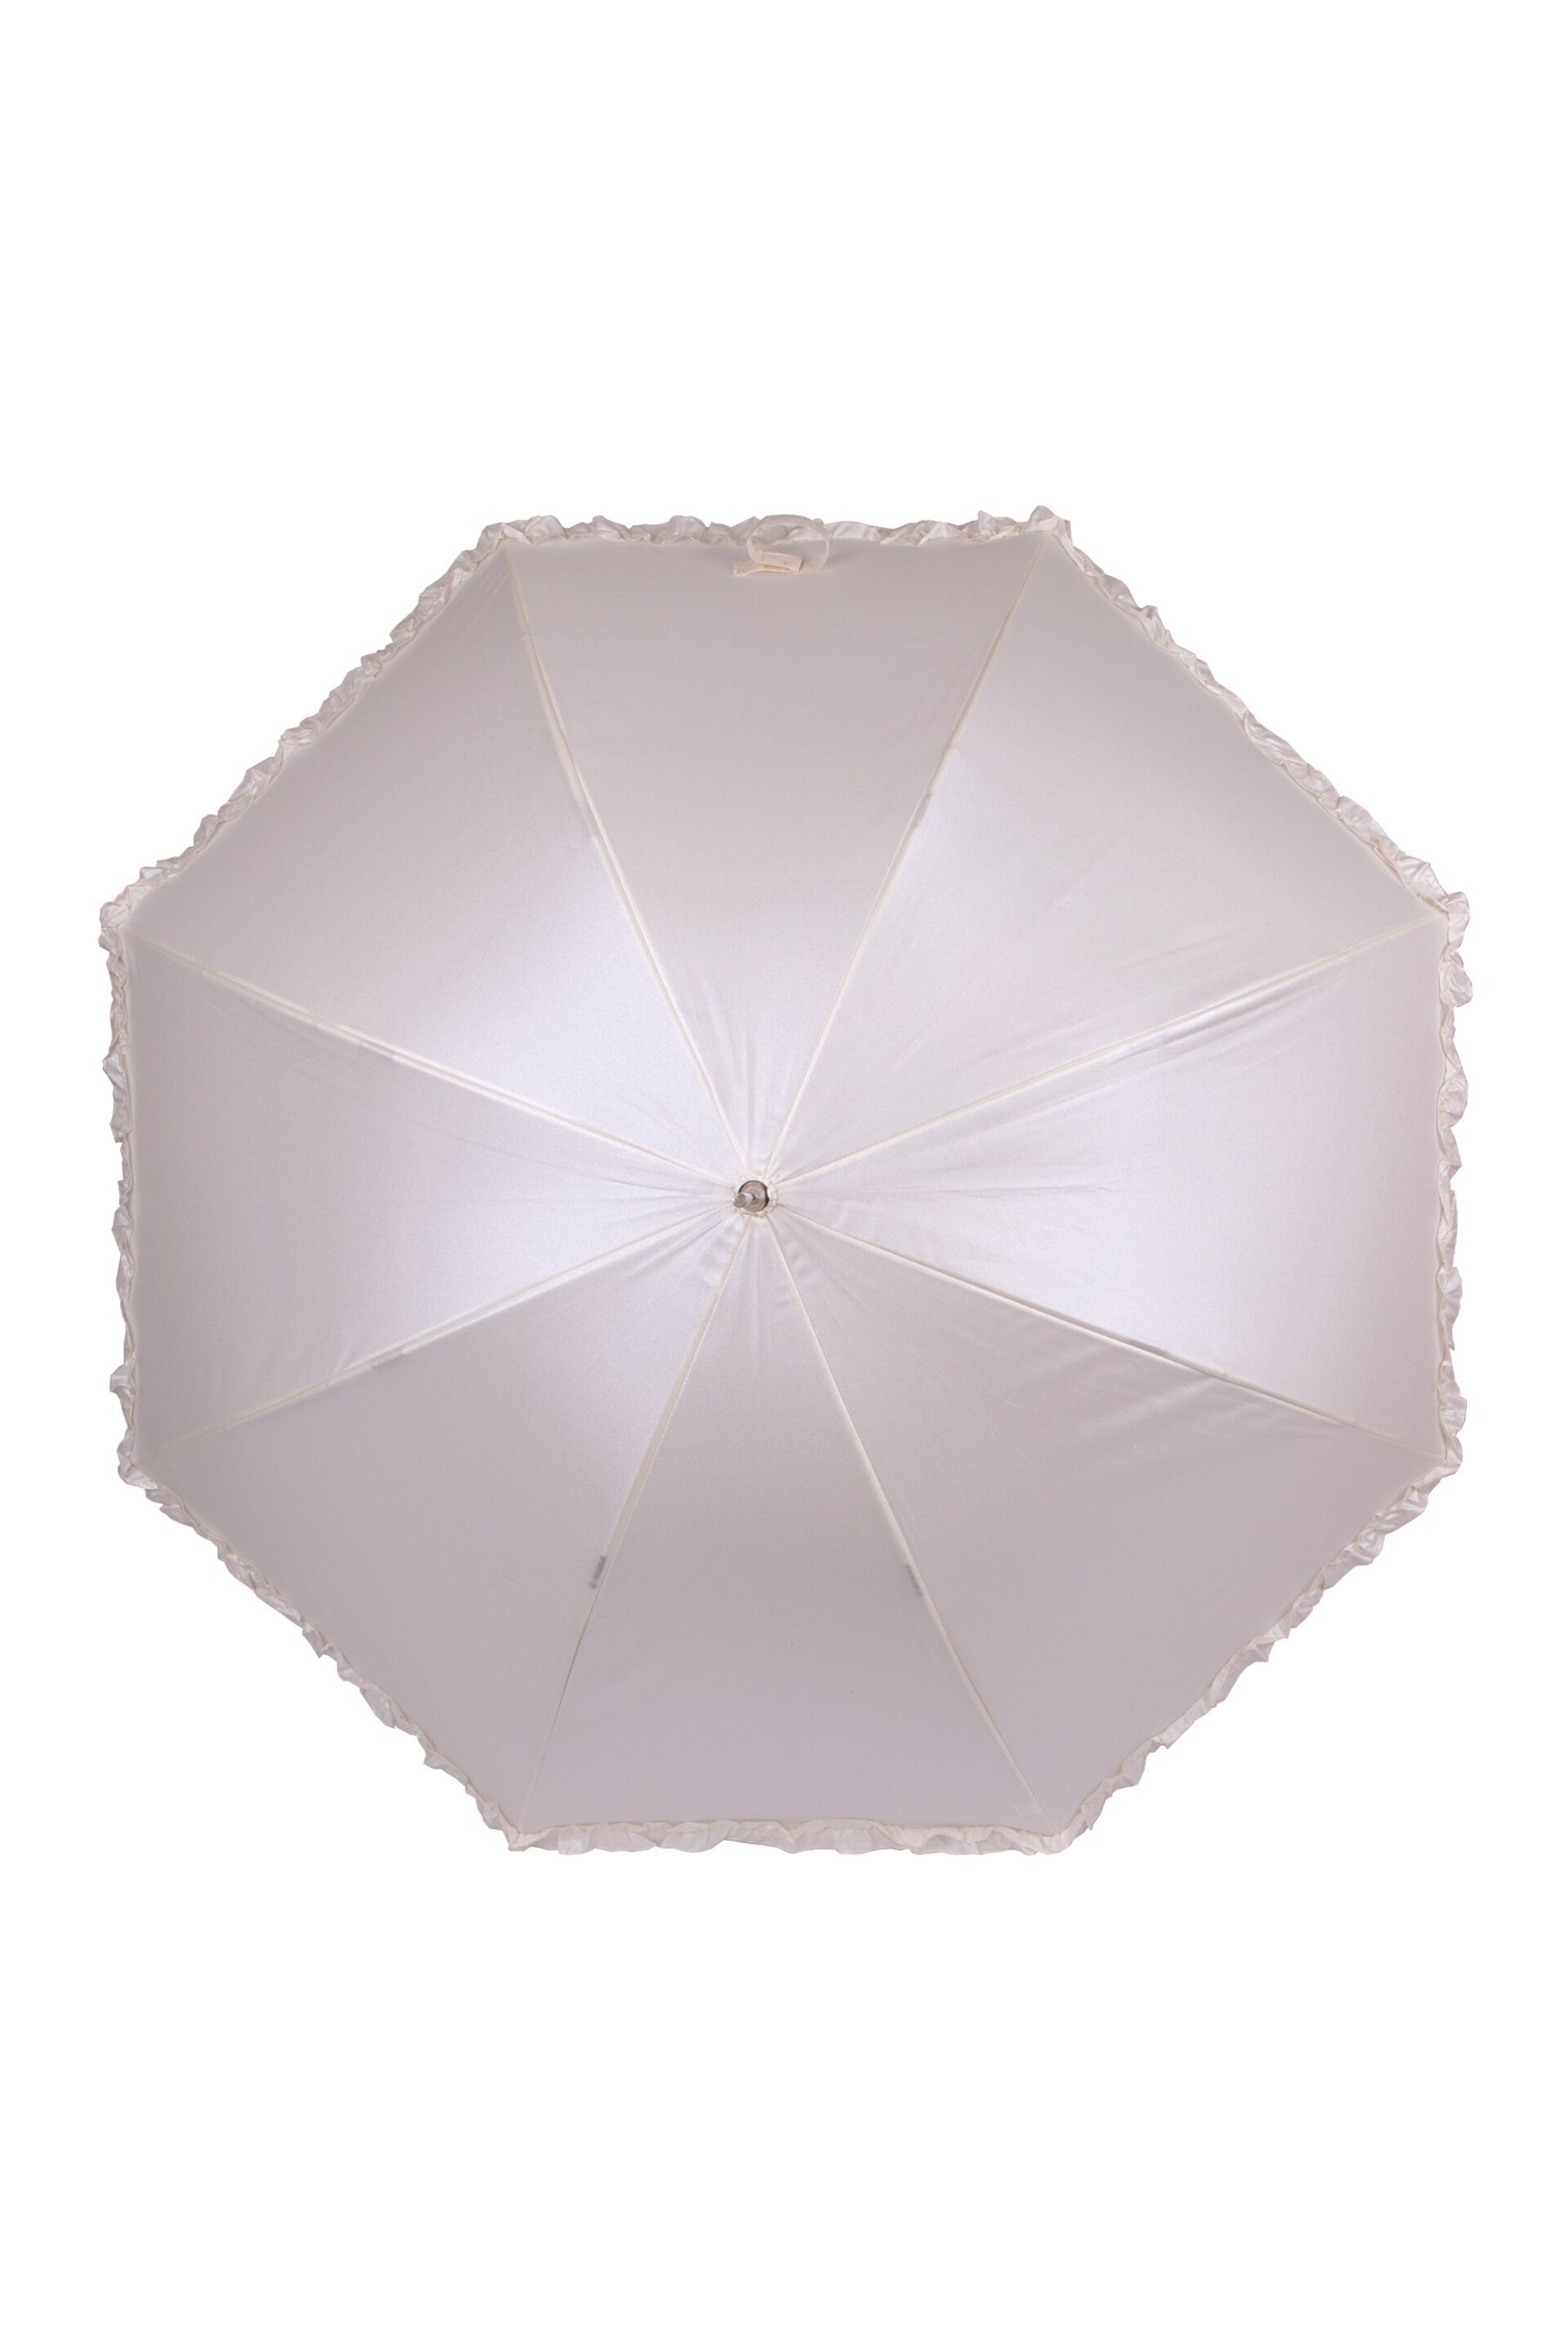 Totes White Pearlised Wedding Walker Umbrella With Frill - Image 2 of 4